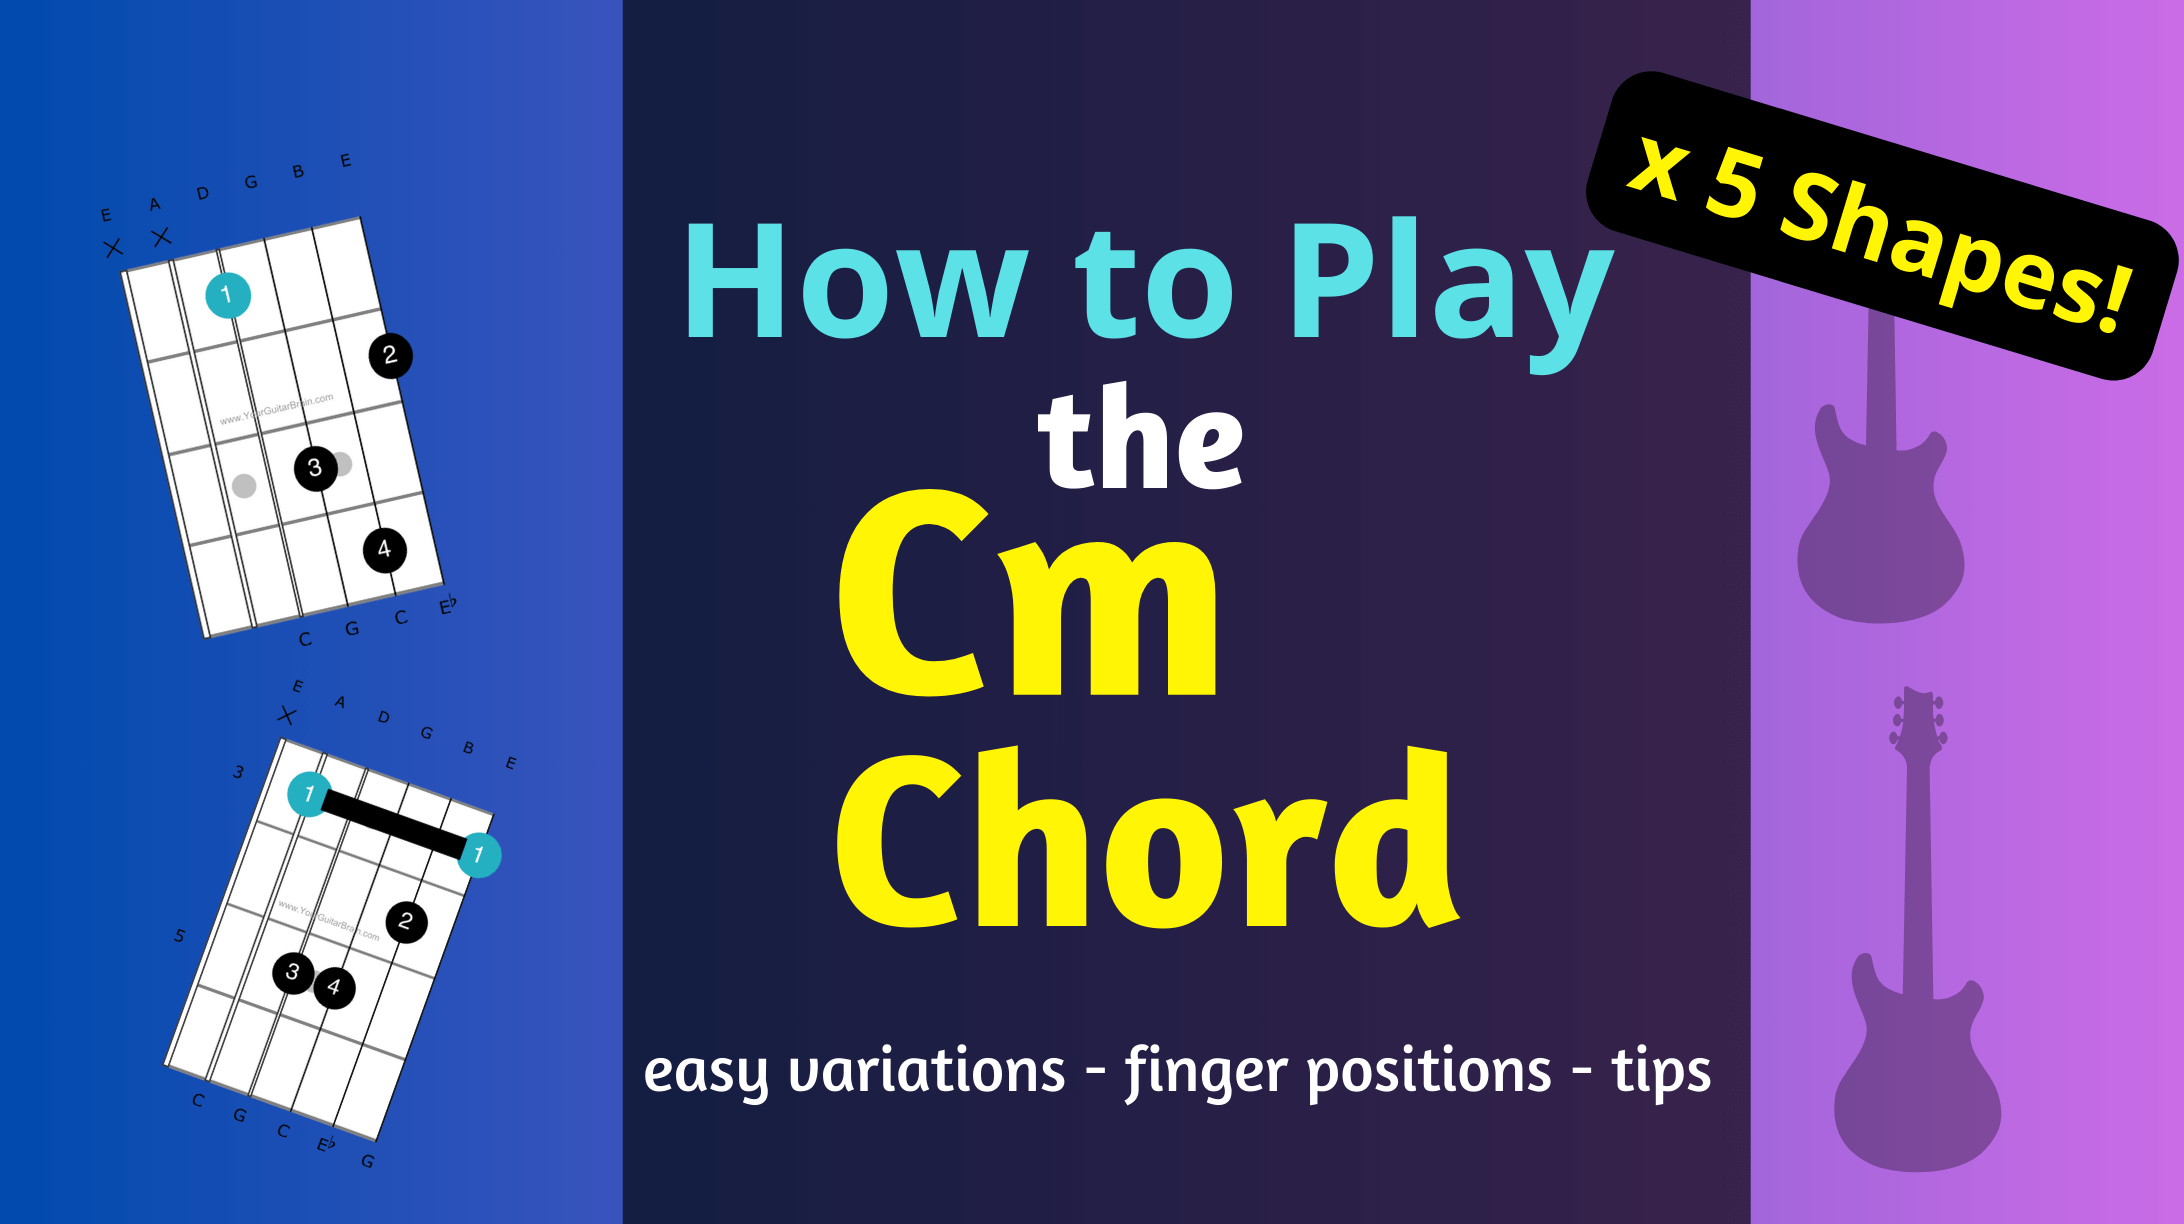 How to Play the Cm Chord guitar lesson with an image of an acoustic guitar